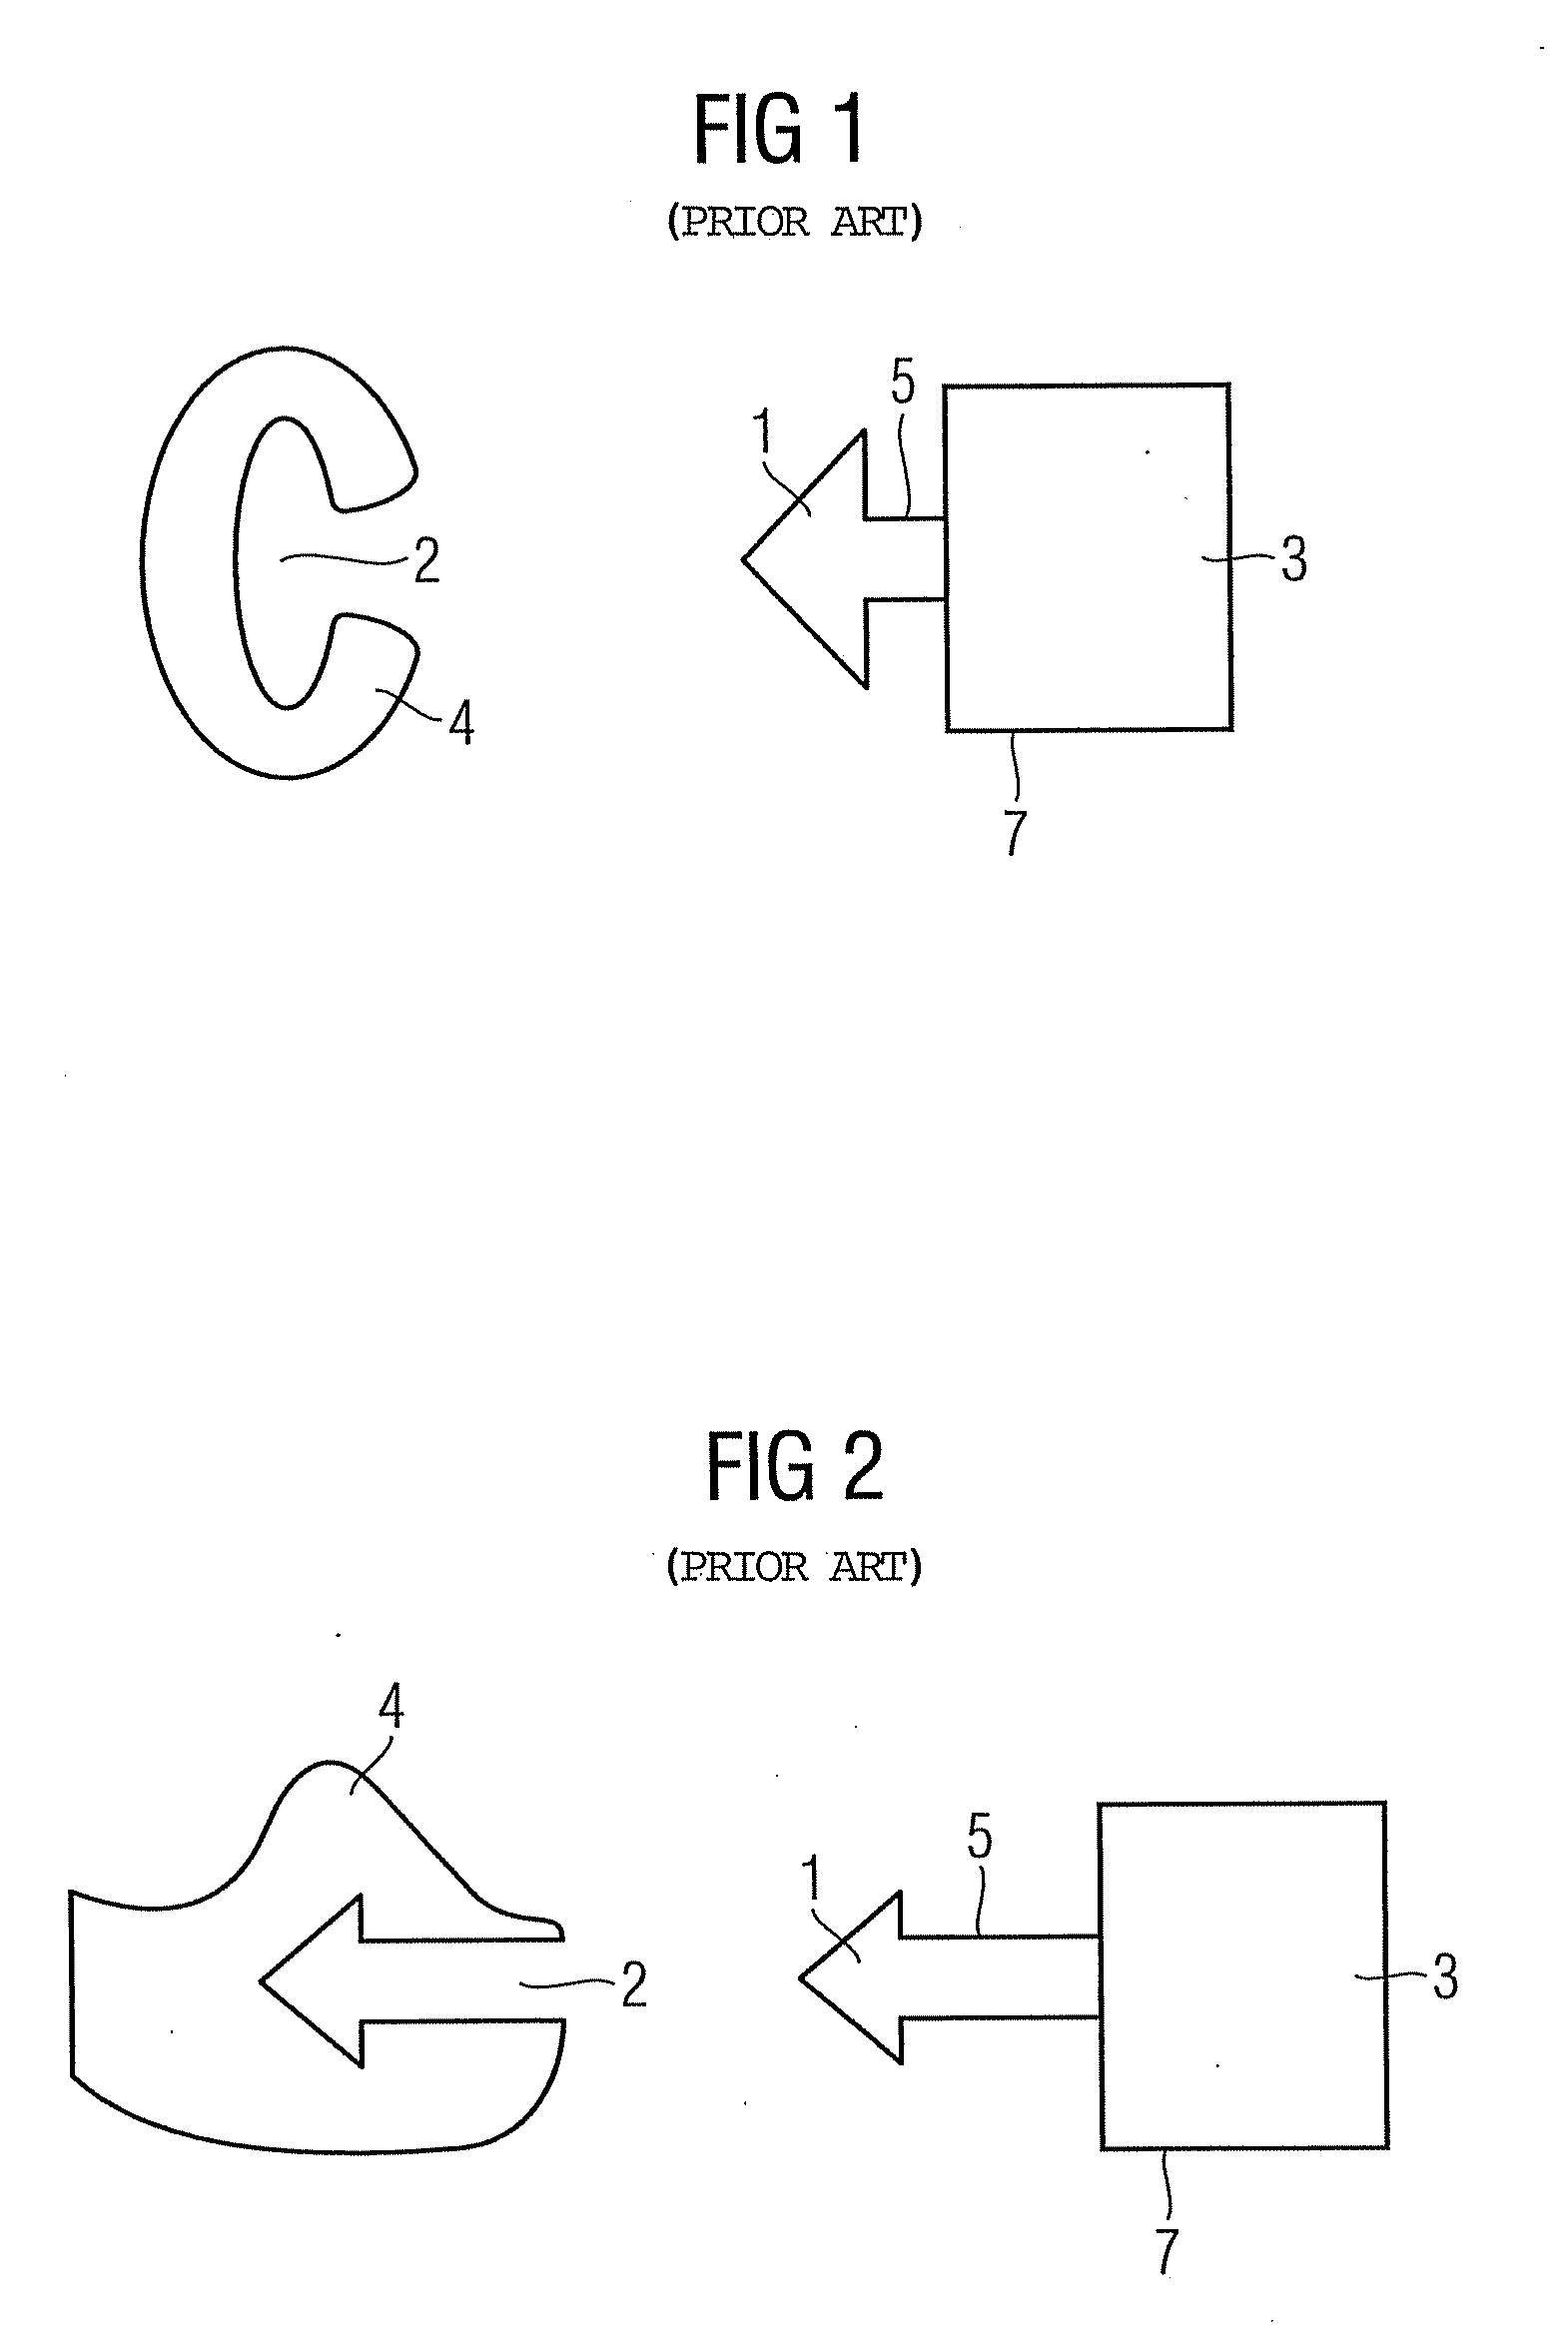 Ear mold for a hearing device